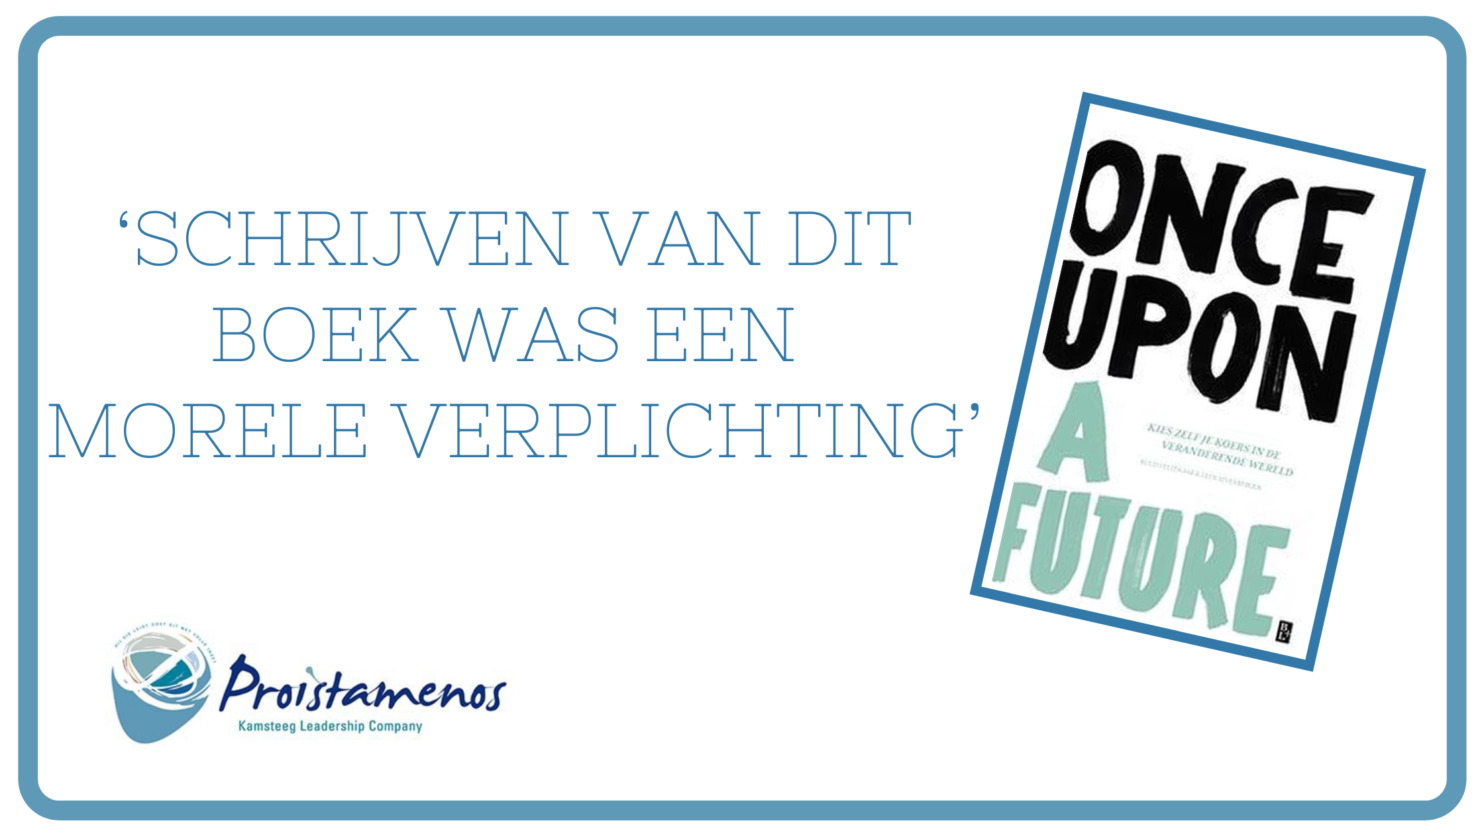 RECENSIE: ONCE UPON A FUTURE